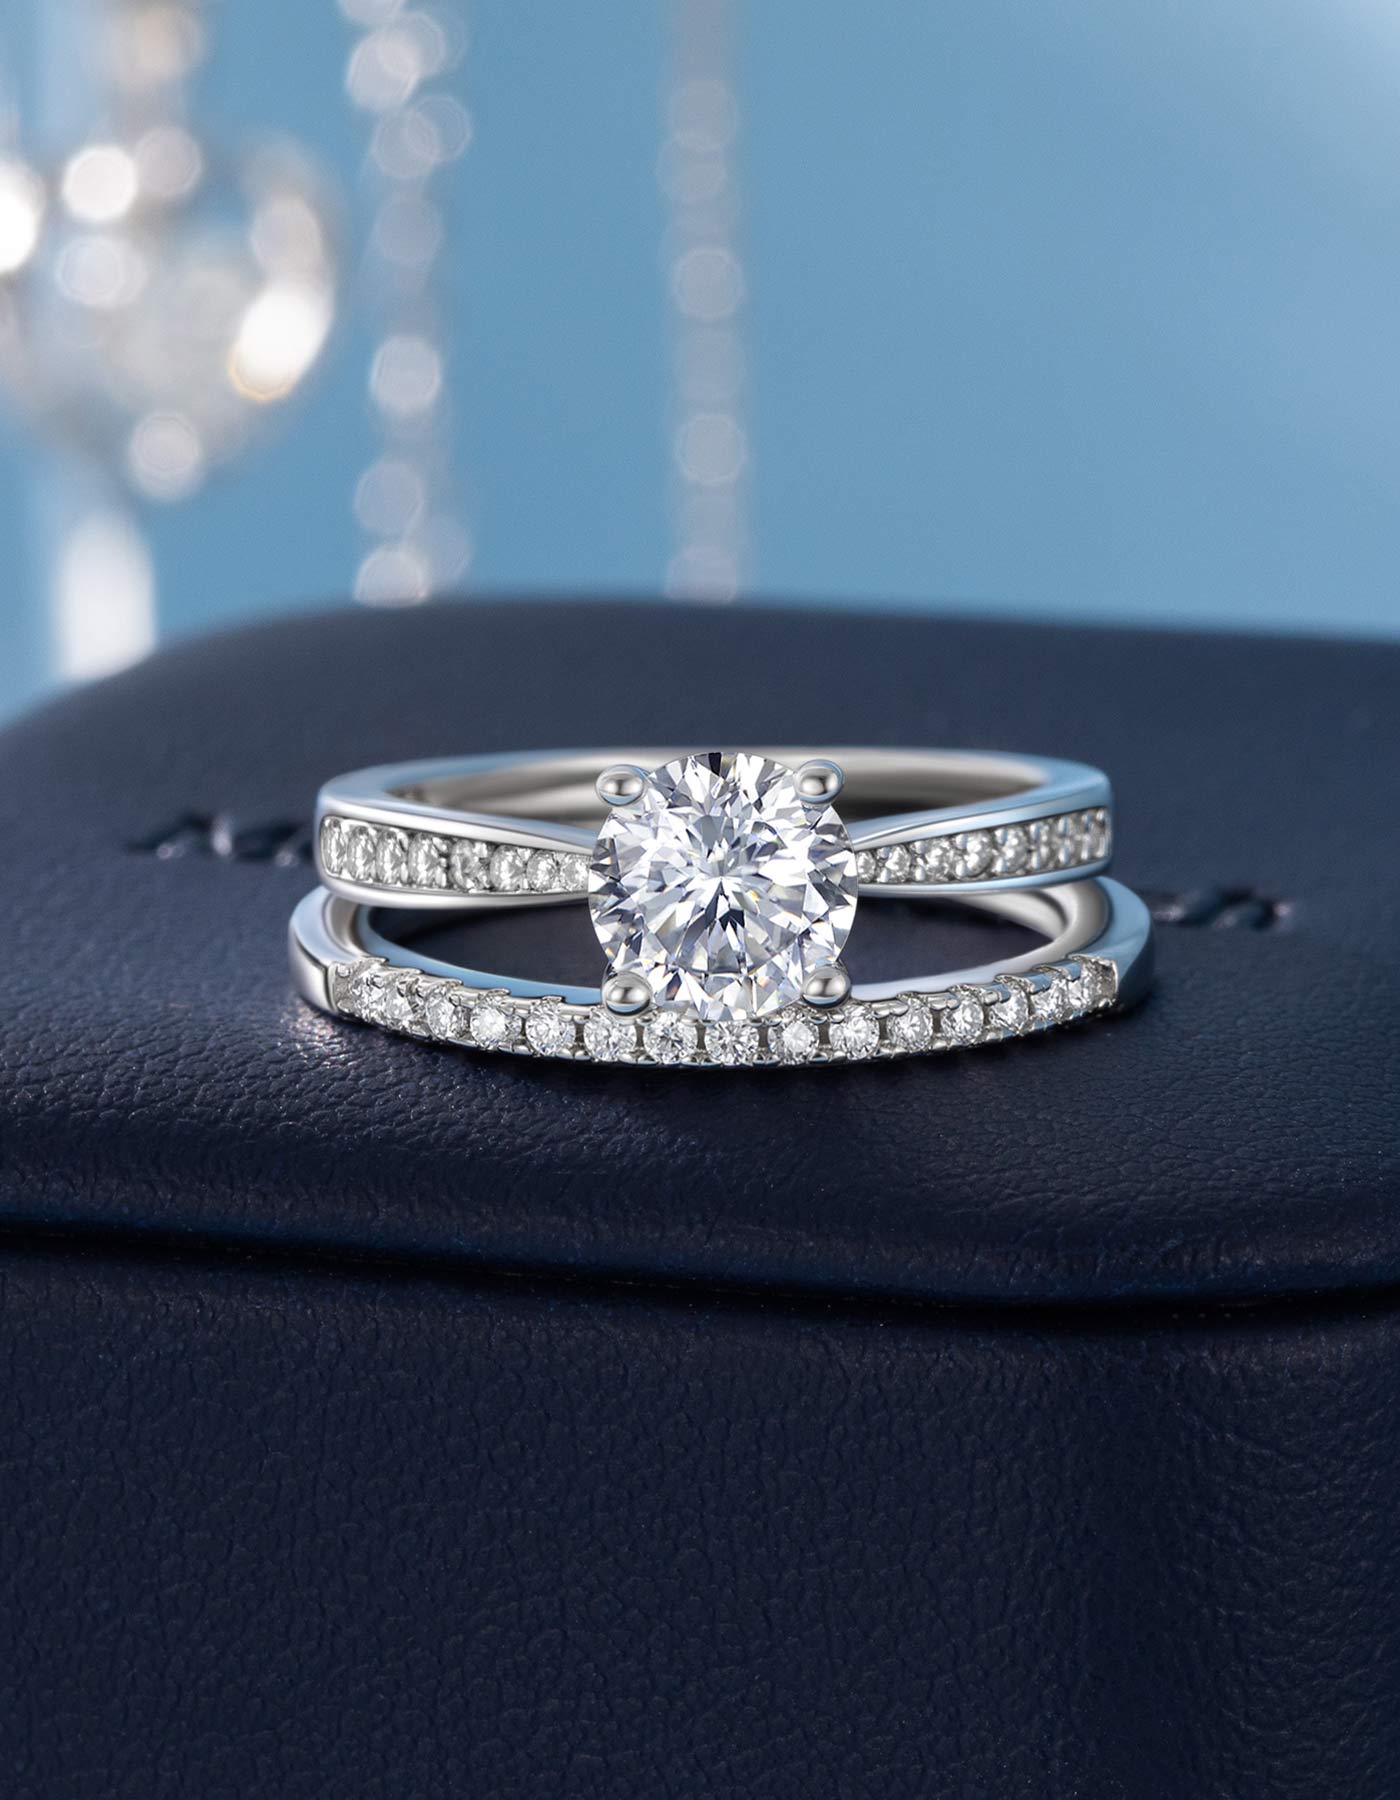 MomentWish Moissanite Rings and Wedding Band